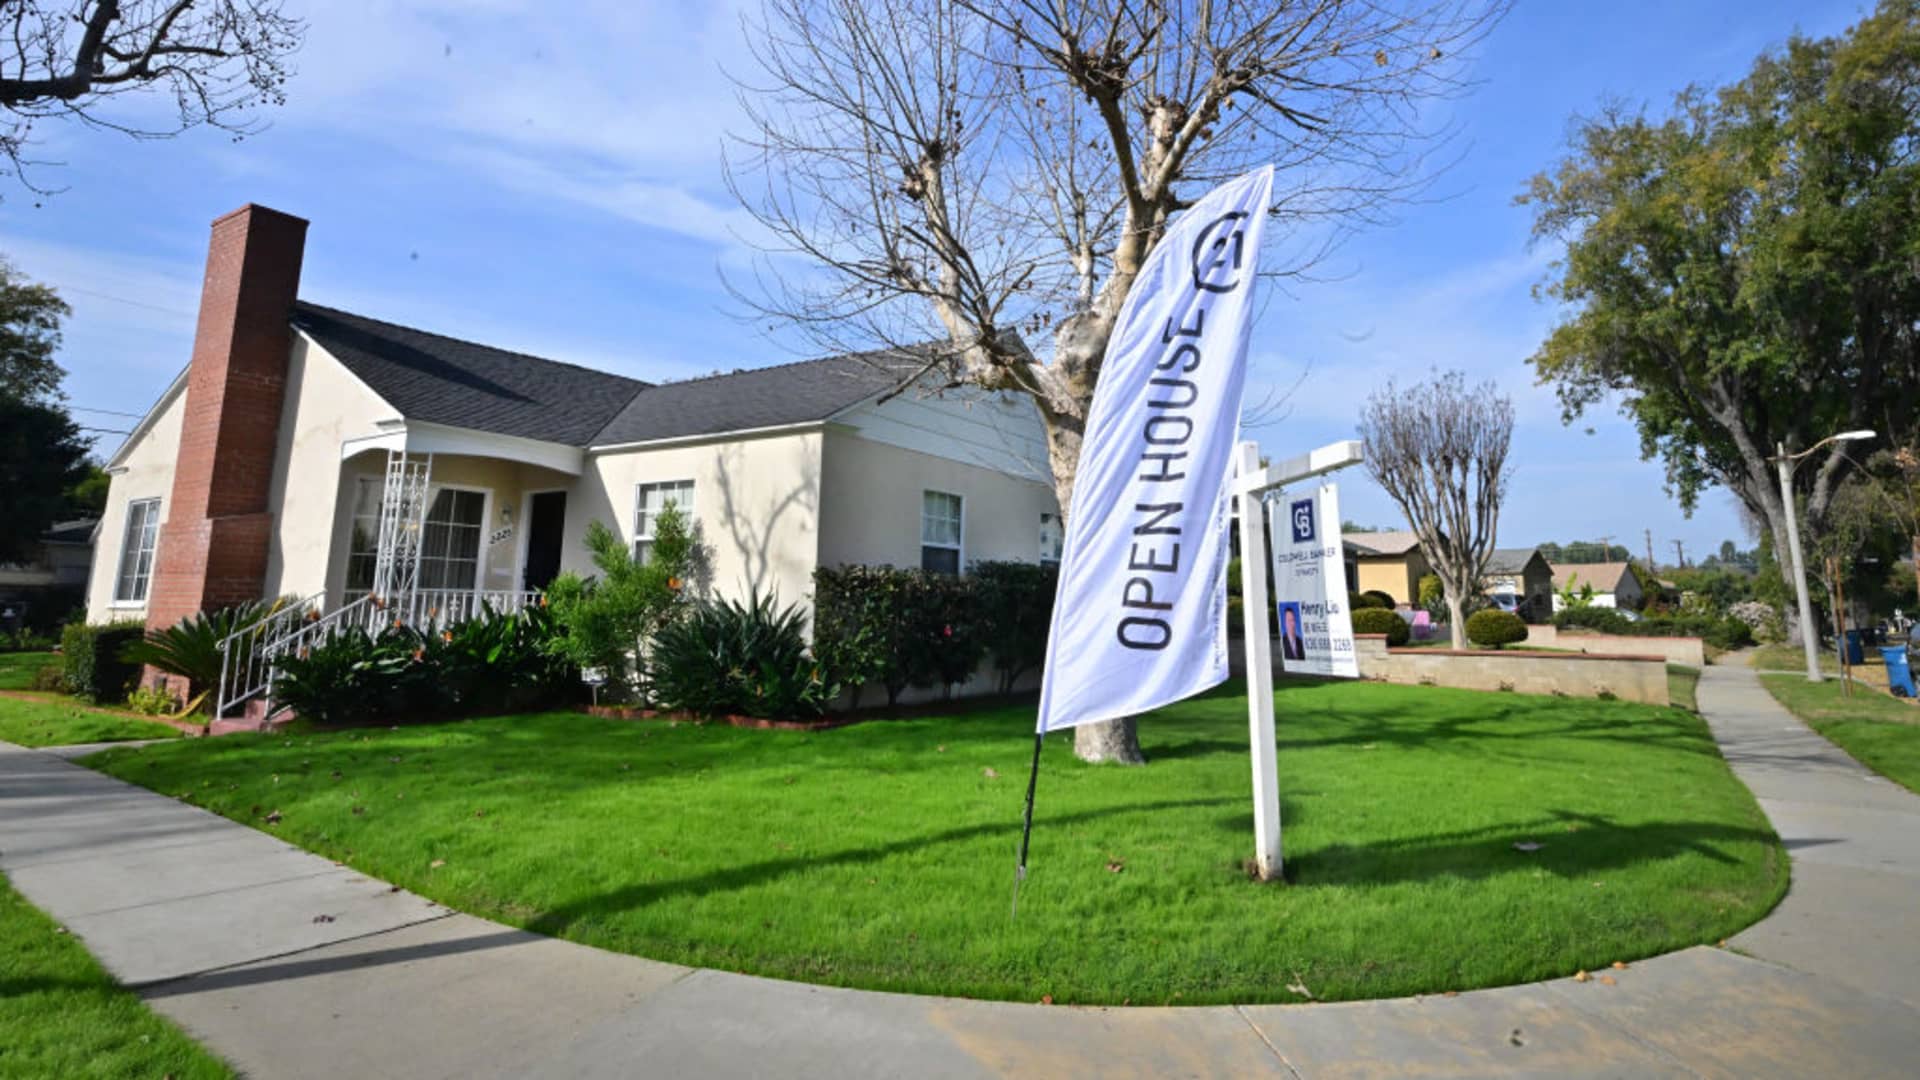 Homebuyer demand pushes mortgage applications higher, even as interest rates inch up again